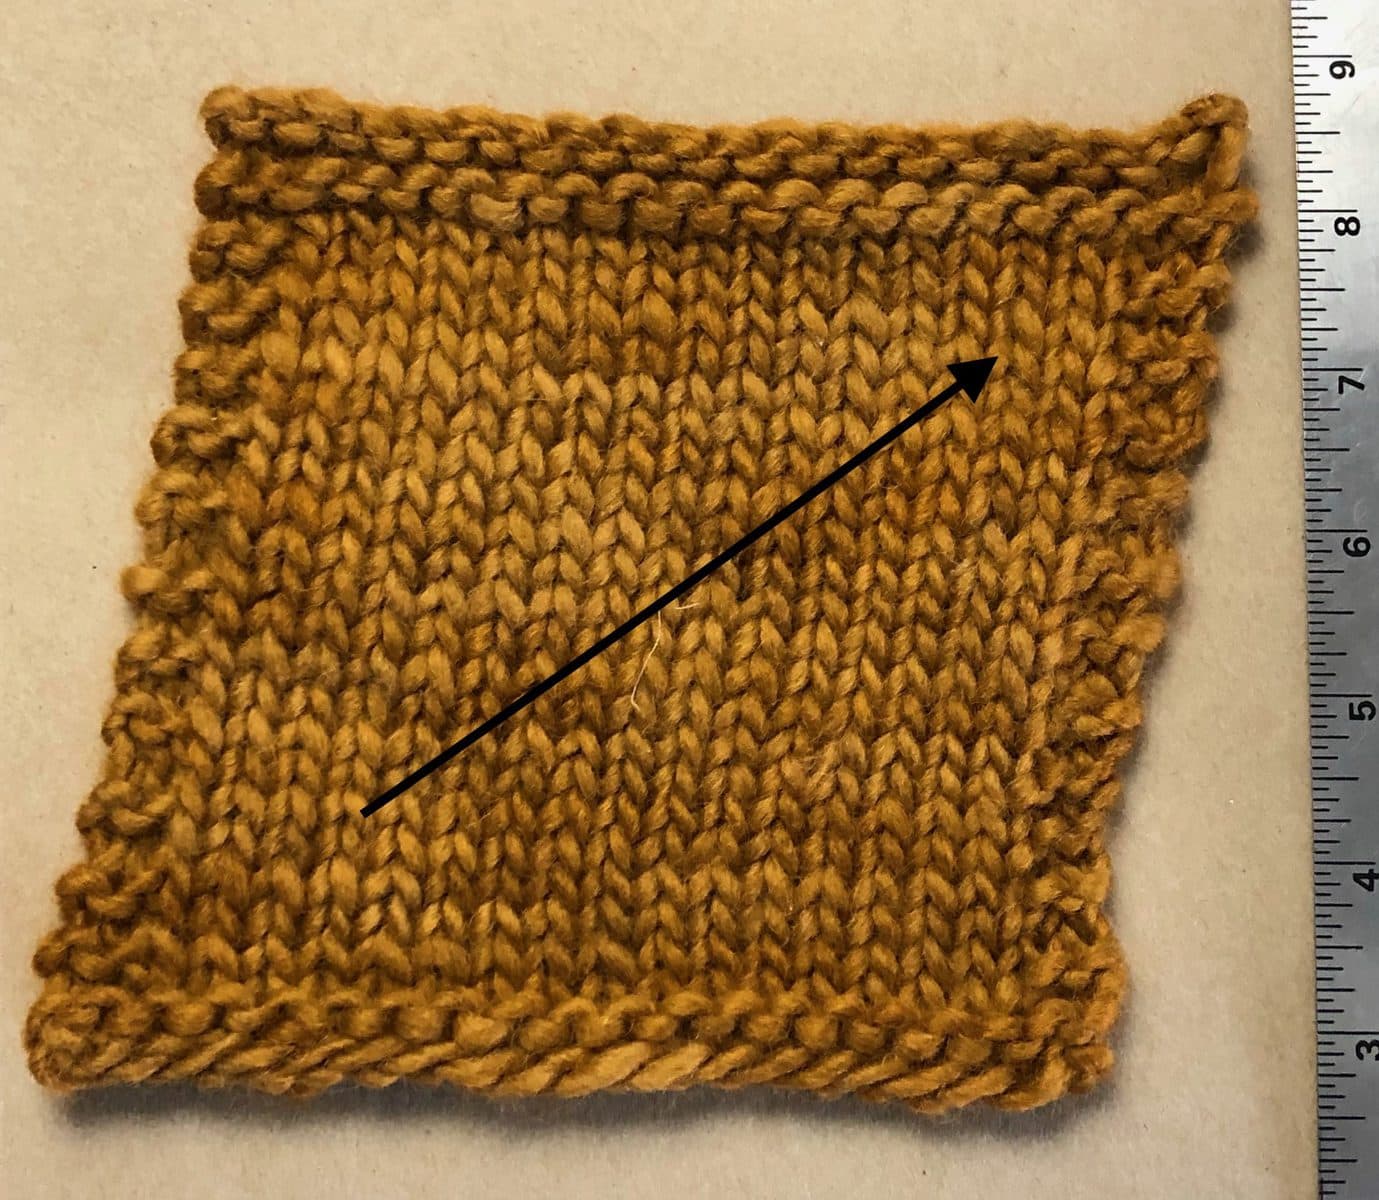 image description: a swatch of stockinette stitch, with a noticeable right-leaning bias; an arrow is superimposed on the image to draw attention to the lean